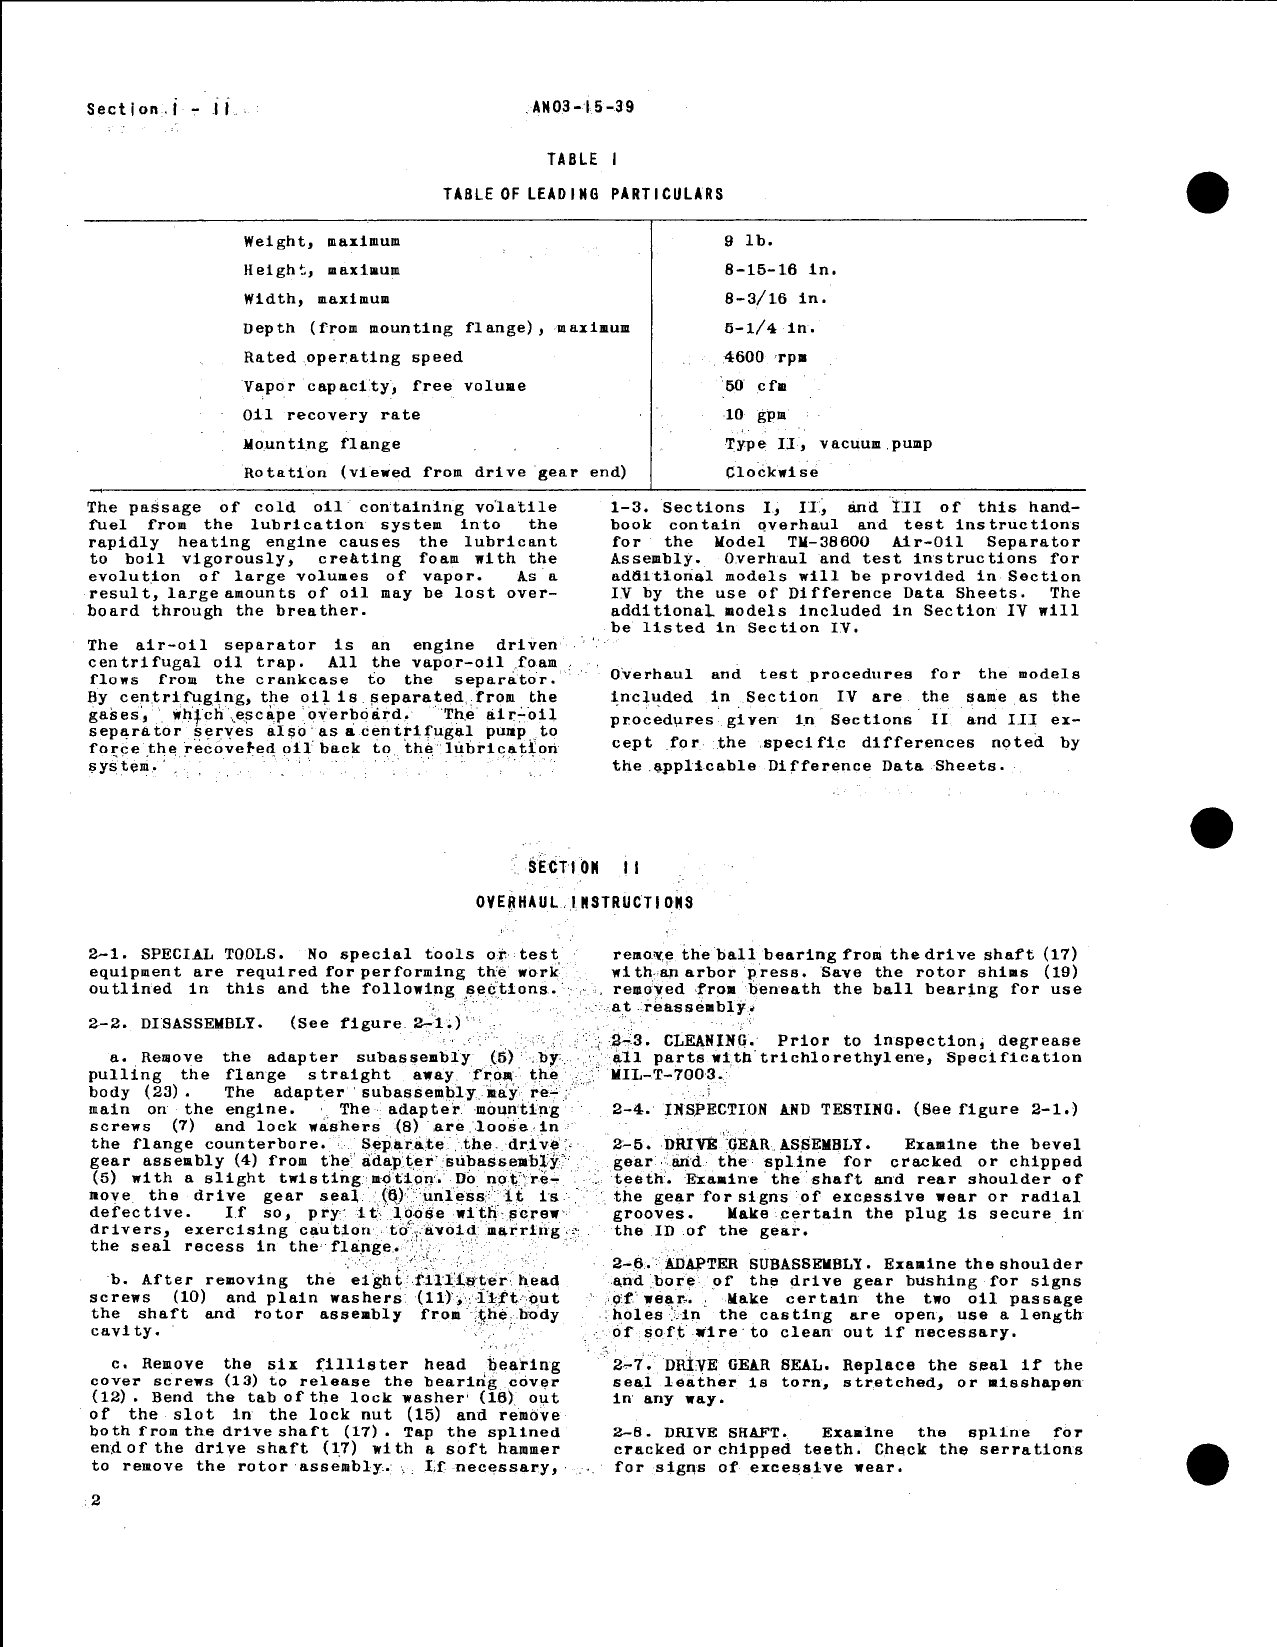 Sample page 4 from AirCorps Library document: Overhaul Instructions for Model TM-38600 Air-Oil Separator (Thompson)